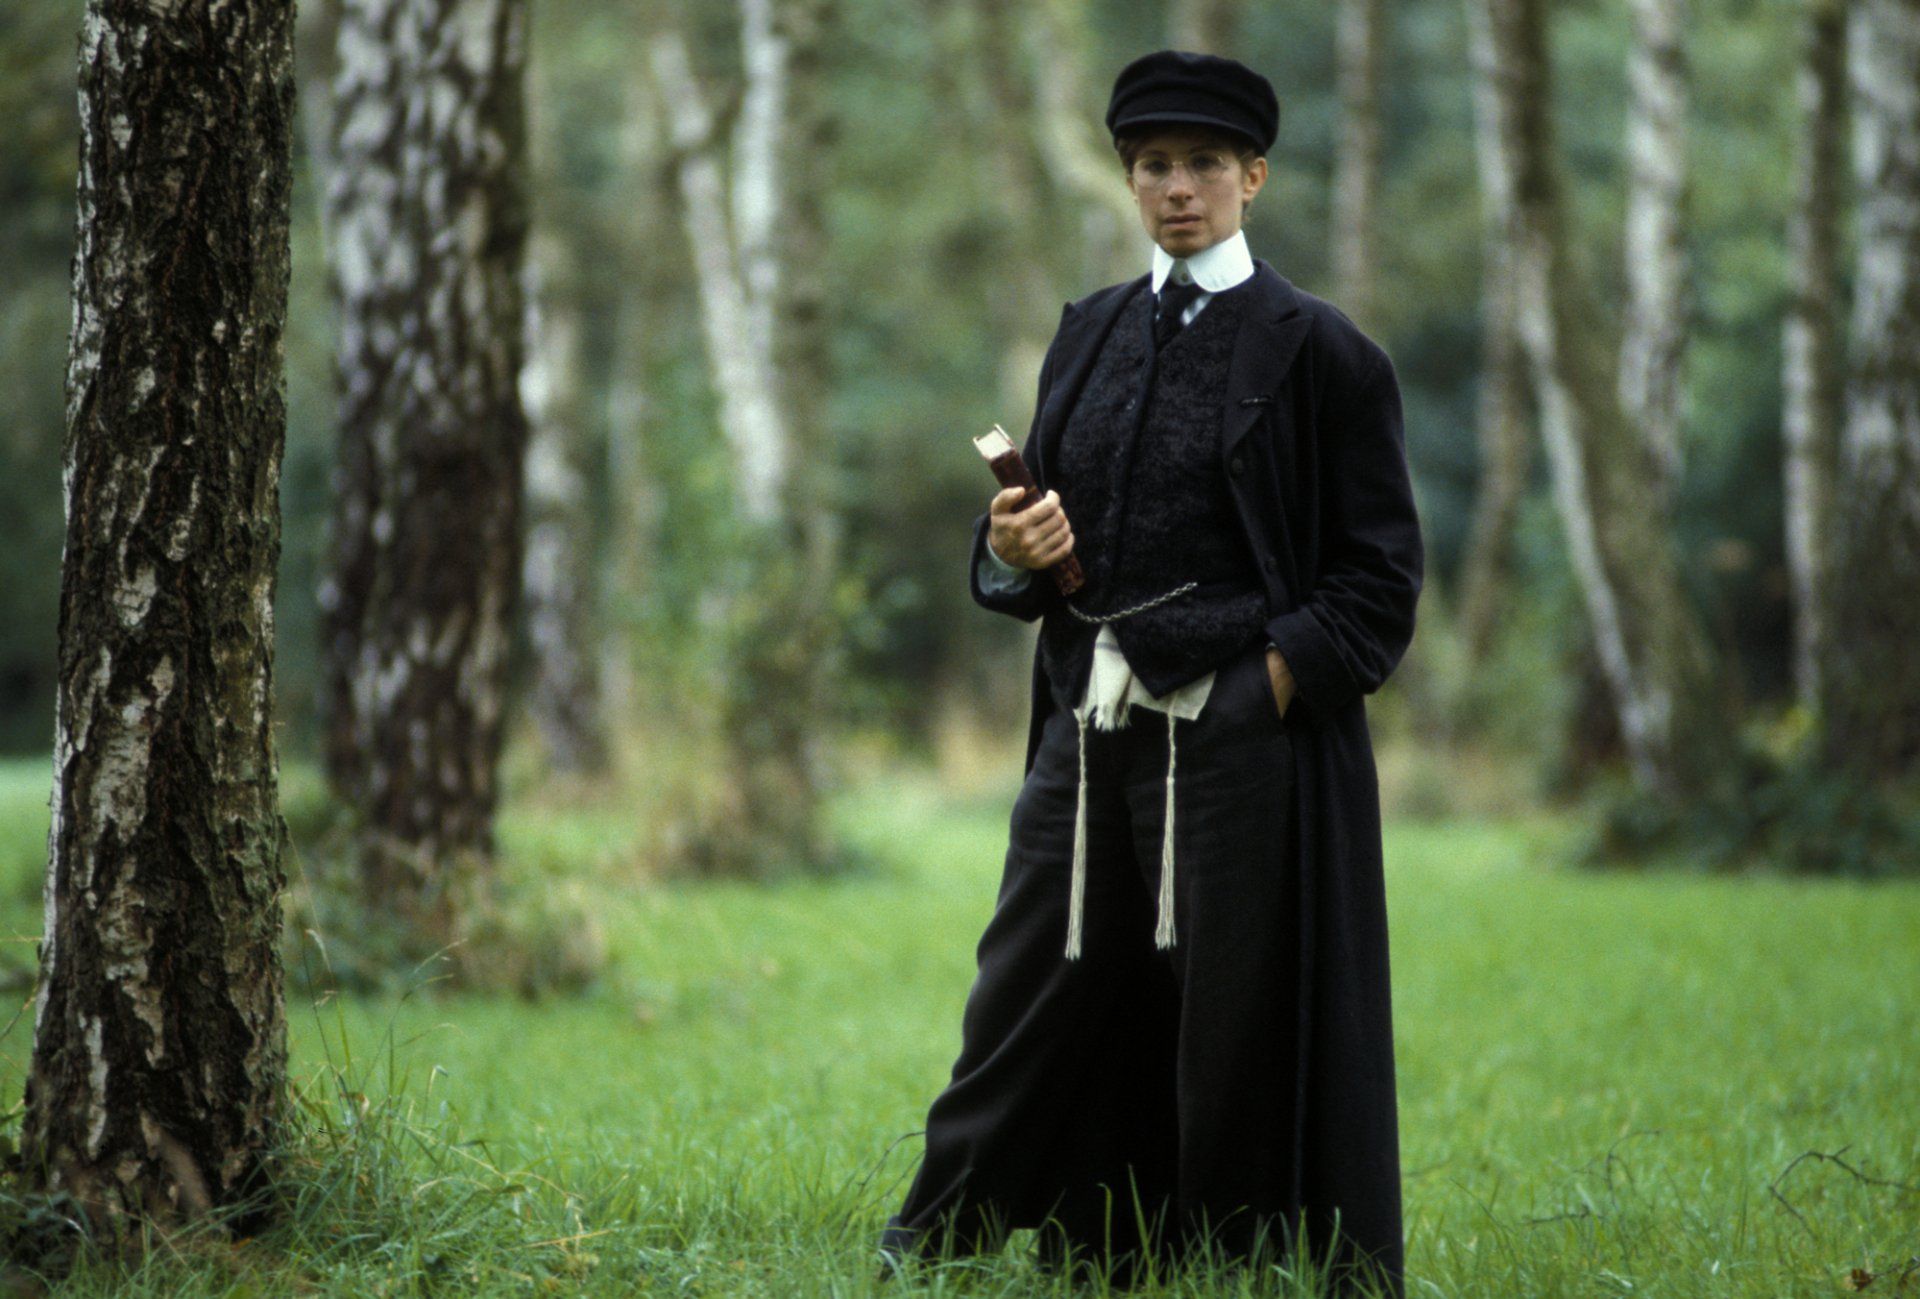 Barbra Streisand as Yentl, who poses as a boy to study the Talmud.